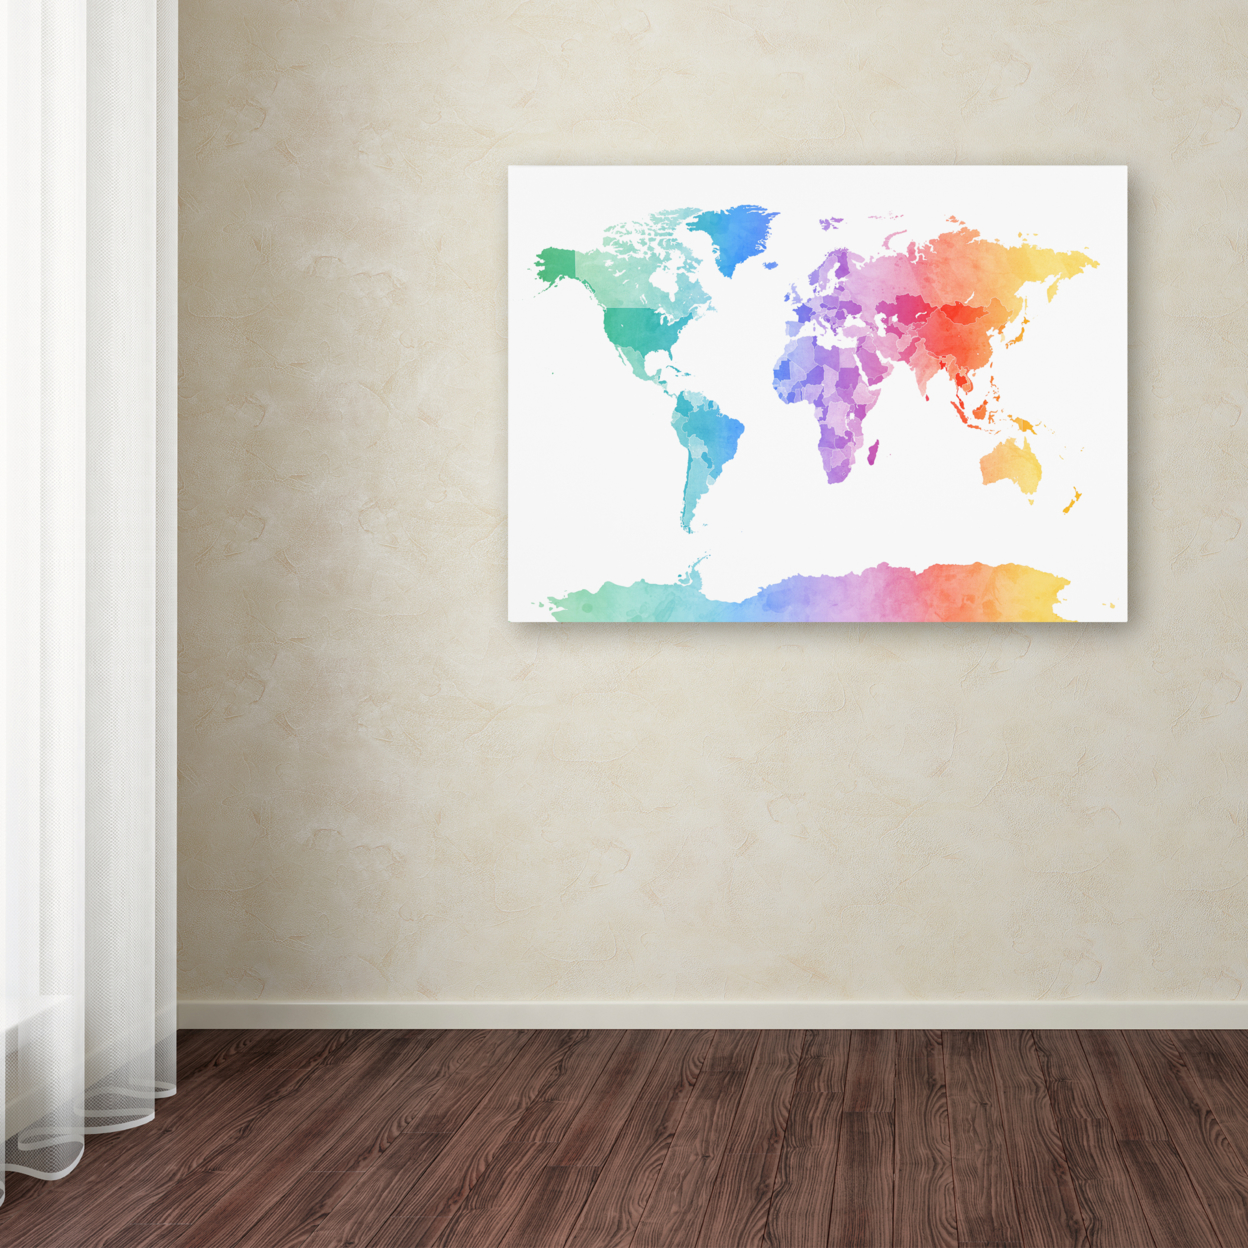 Michael Tompsett 'Watercolor Map Of The World' Canvas Wall Art 35 X 47 Inches